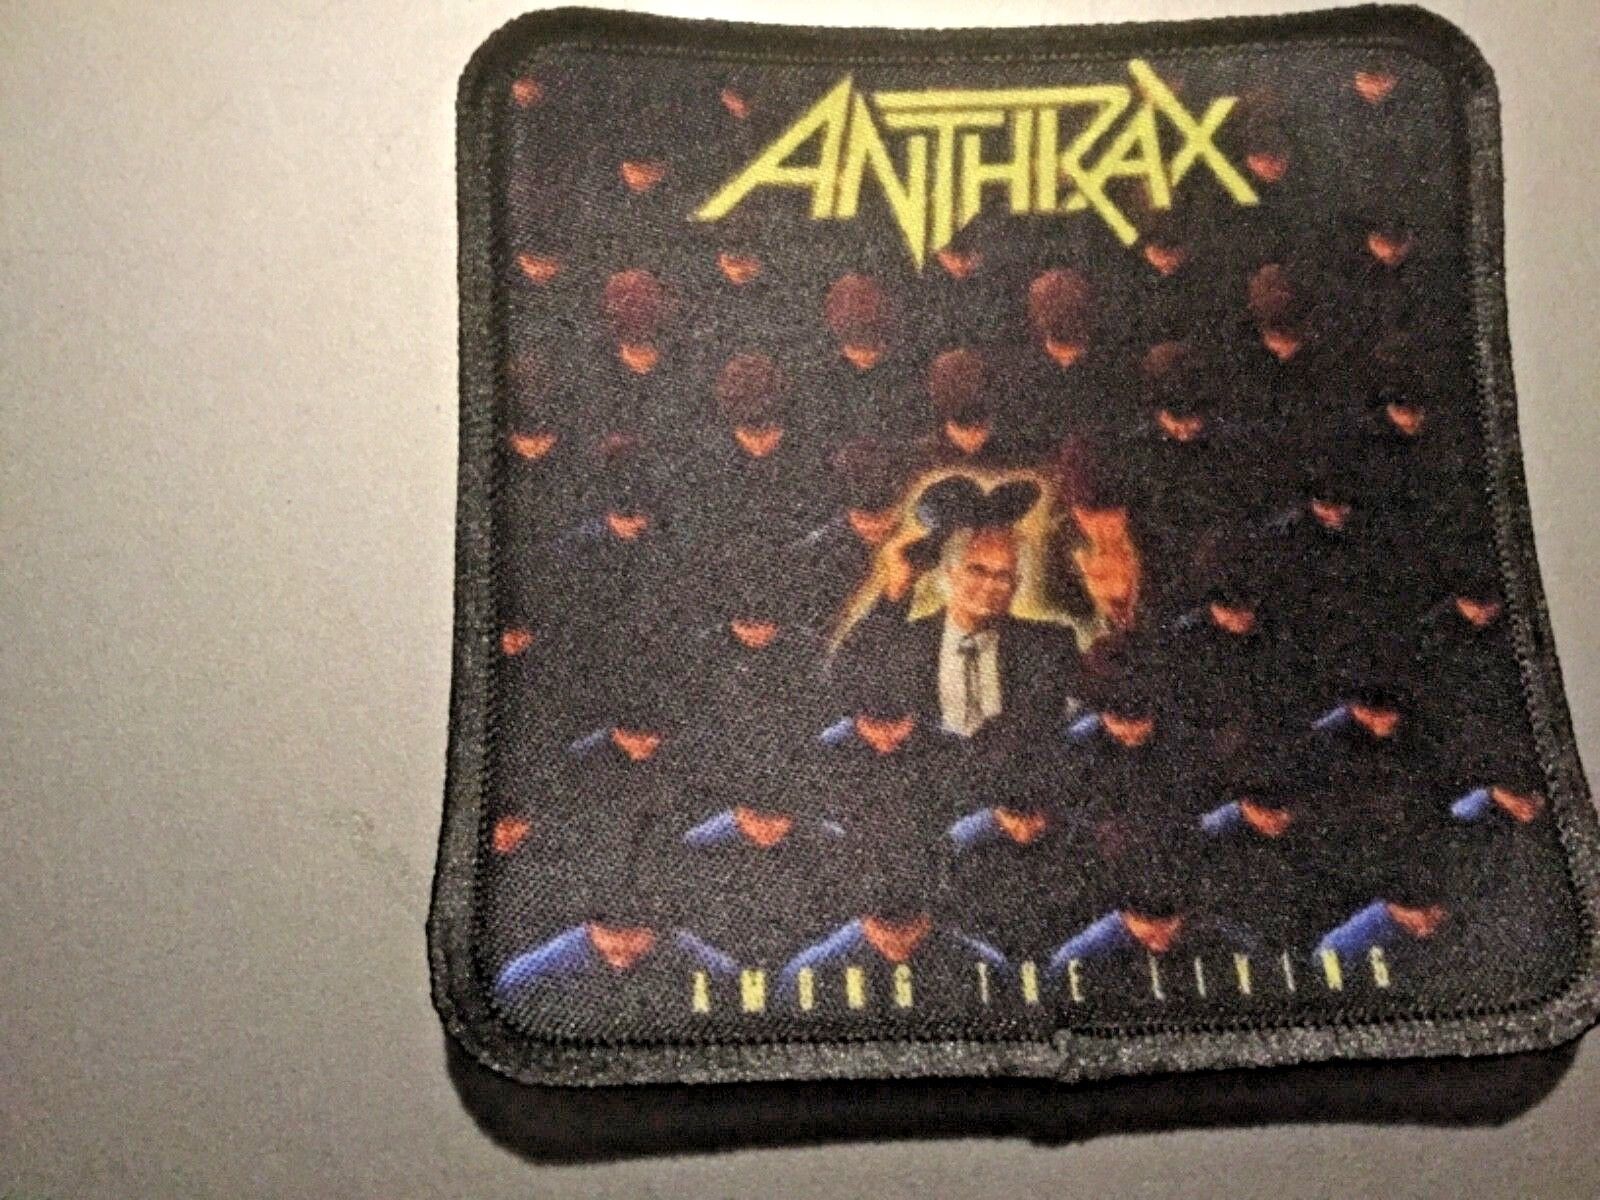 Anthrax Among The Living Sublimated Patch 3”x3” Album Cover Rock Metal